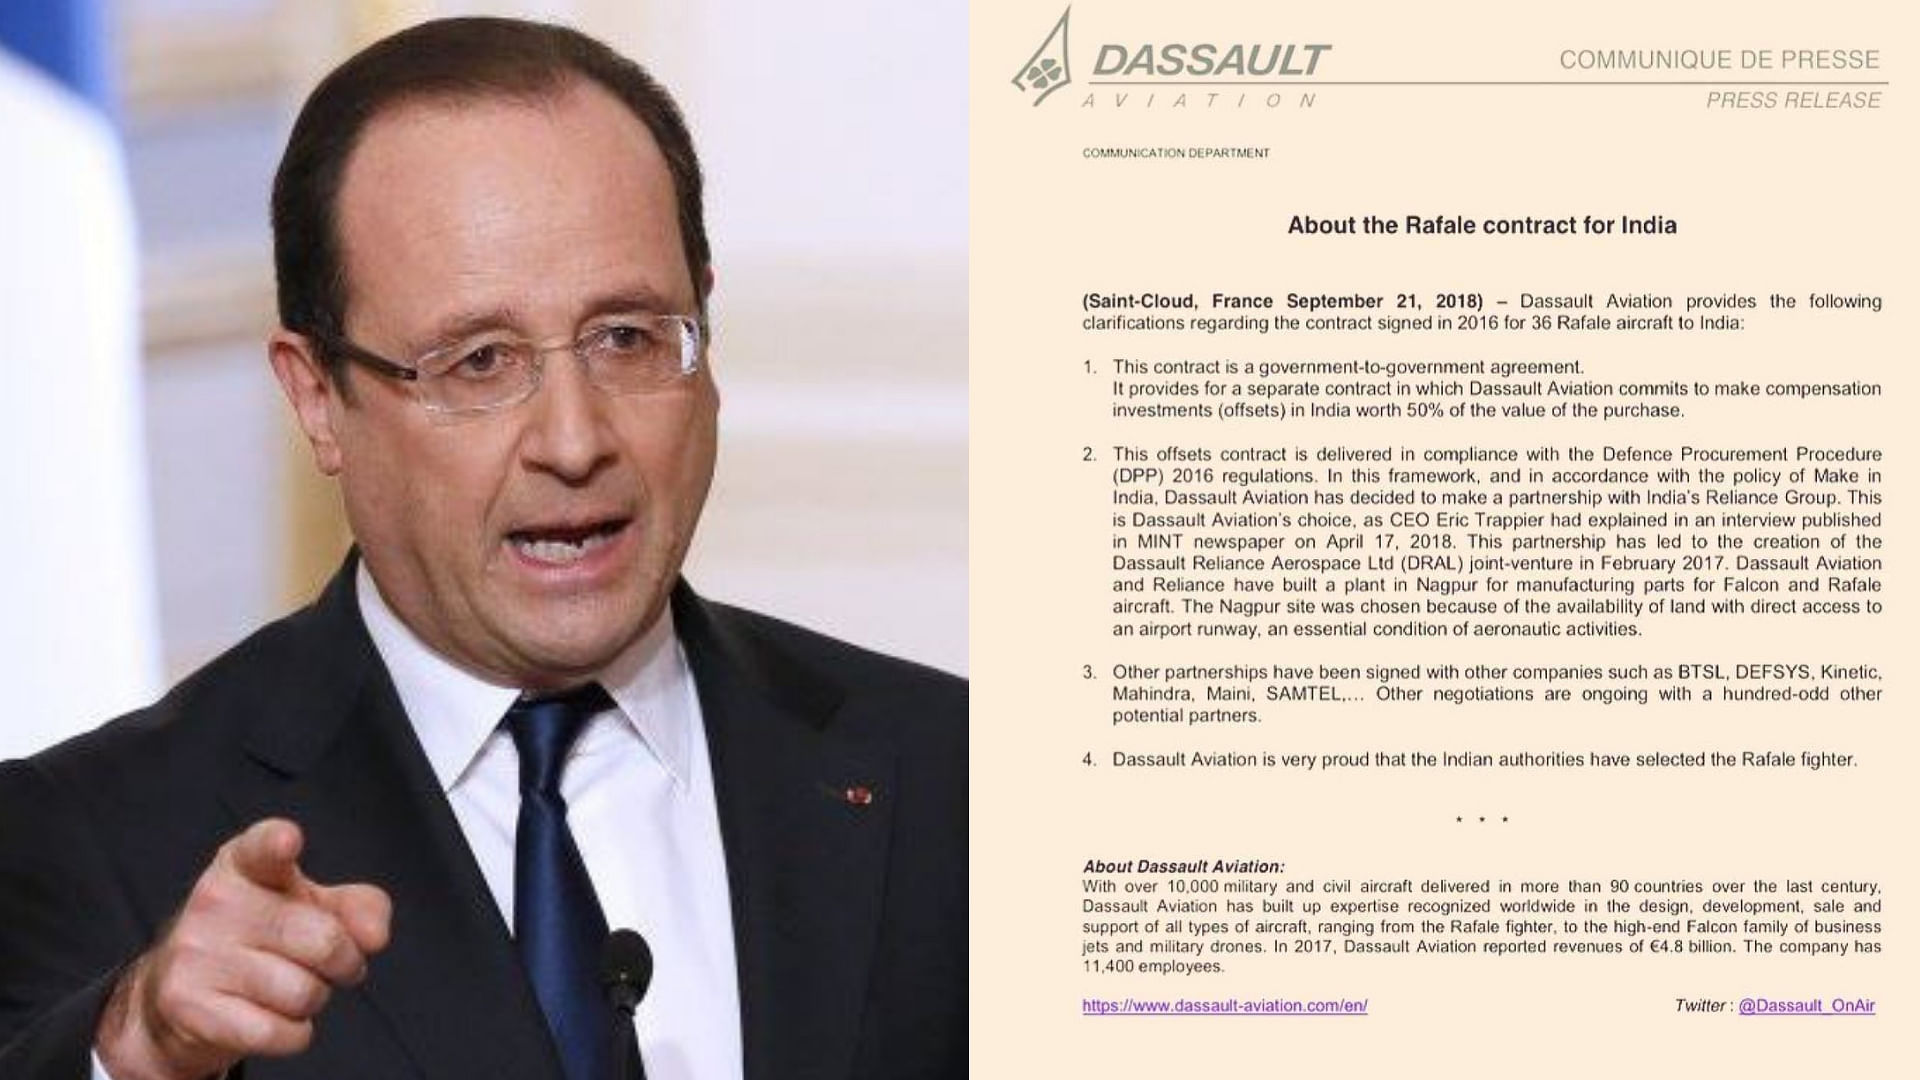 Former French President Francois Hollande (Left) and statement issued by Dassault Aviation (Right).